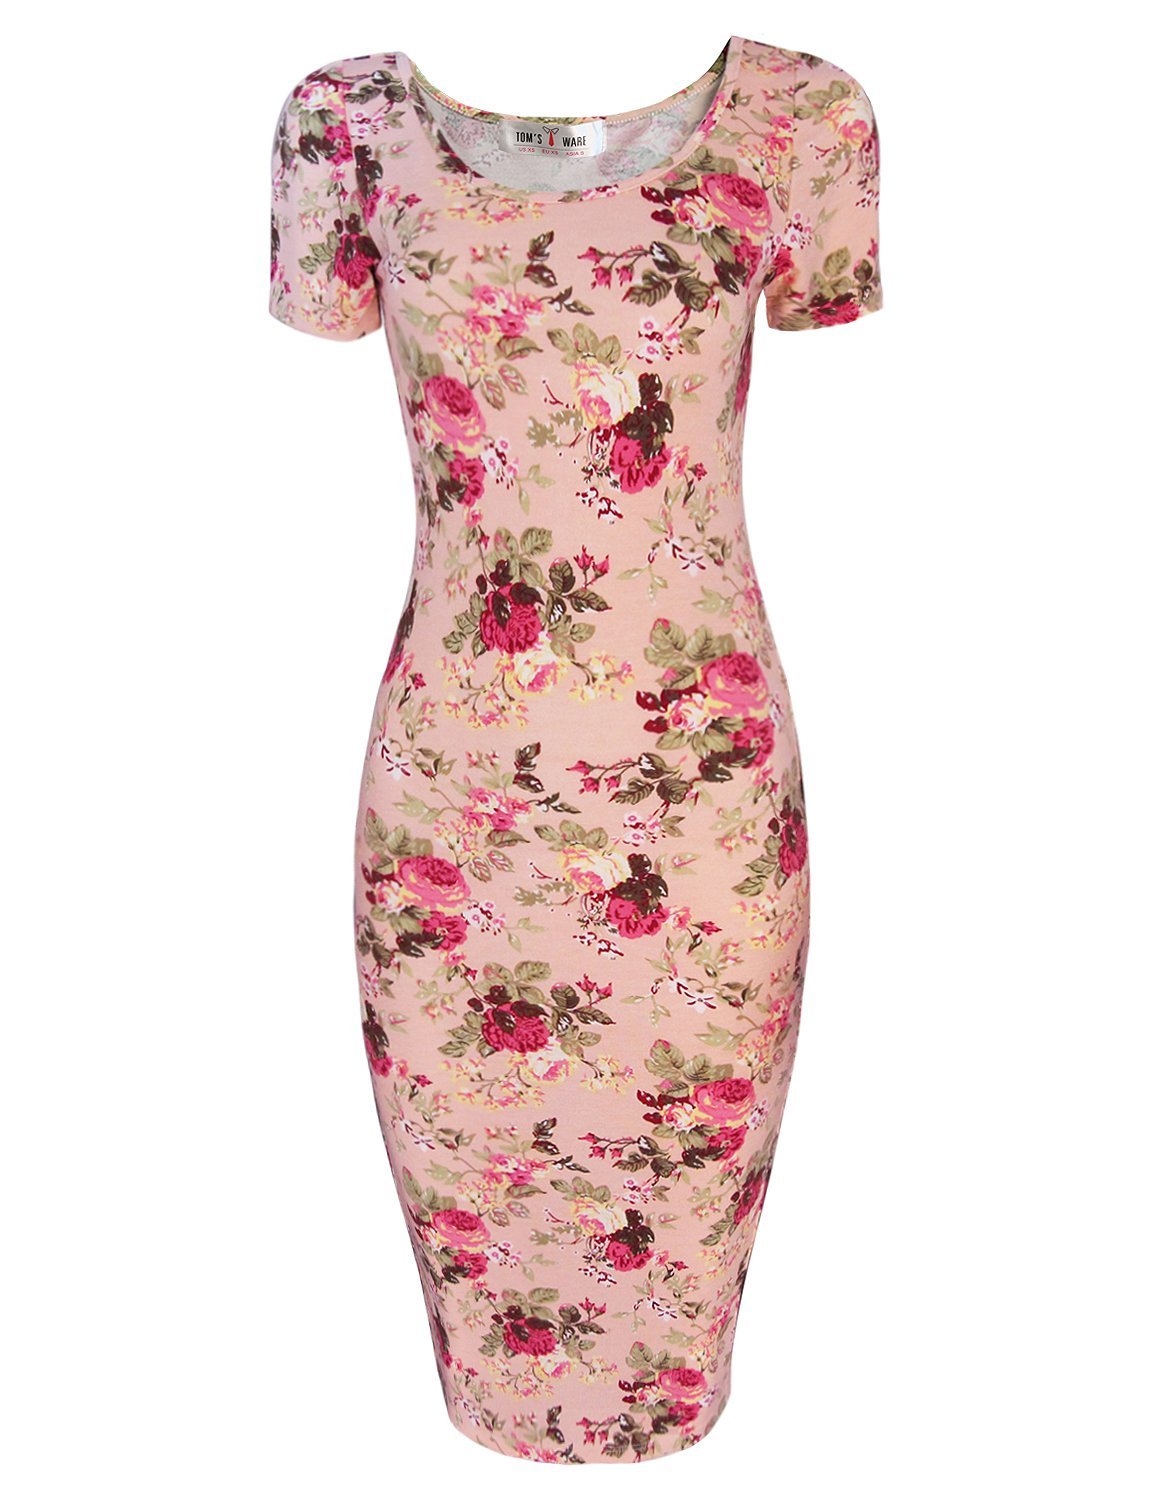 10 Best Floral Dresses for Beautiful Summer